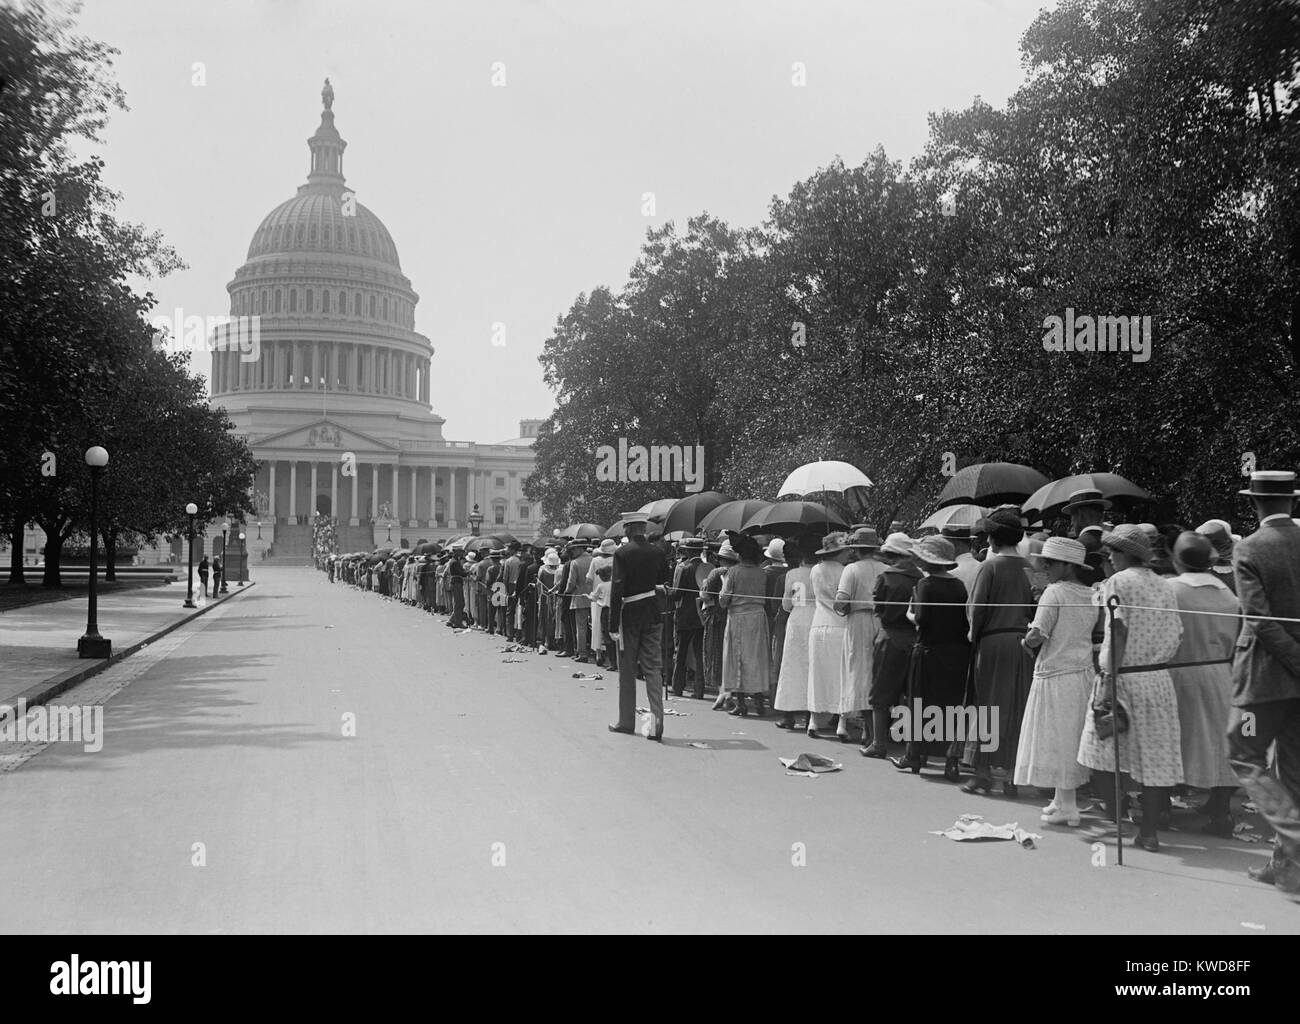 People in long line waiting to pay respects to President Warren Harding in August 1923. Harding died on Aug. 2, and was lying in state at the Capitol before his funeral there on August 8. (BSLOC 2015 16 11) Stock Photo